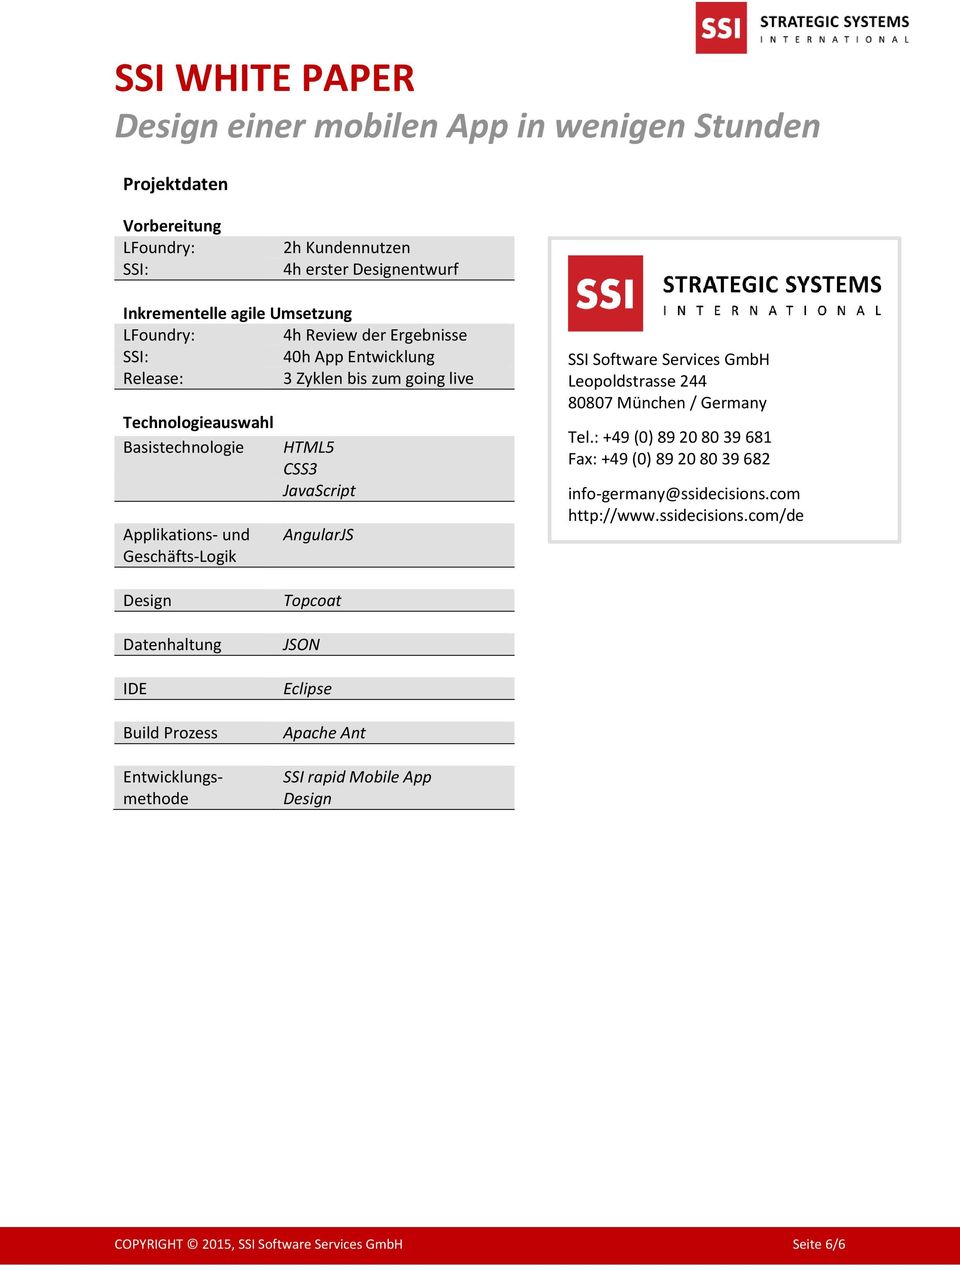 Services GmbH Leopoldstrasse 244 80807 München / Germany Tel.: +49 (0) 89 20 80 39 681 Fax: +49 (0) 89 20 80 39 682 info-germany@ssidecisions.com http://www.